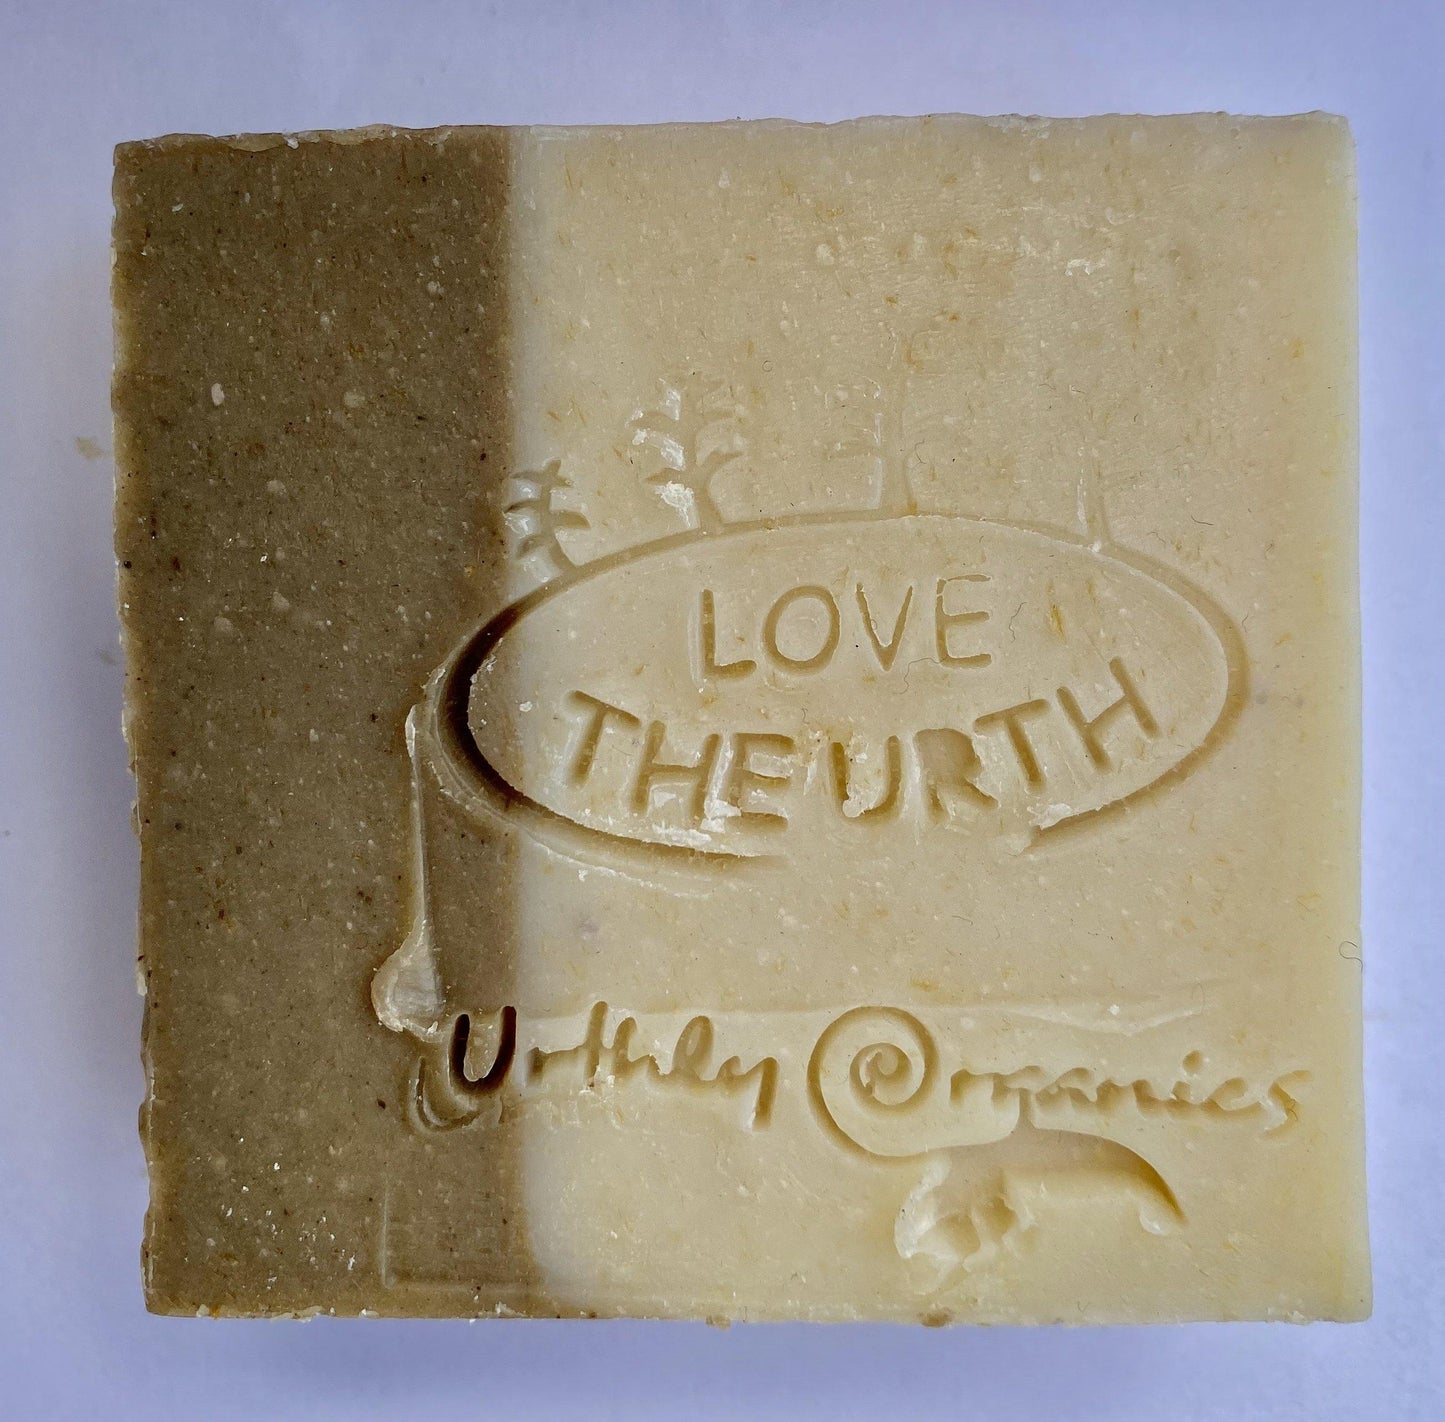 Camel Milk + Spearmint - UrthlyOrganics Natural ethical skincare and cleaning